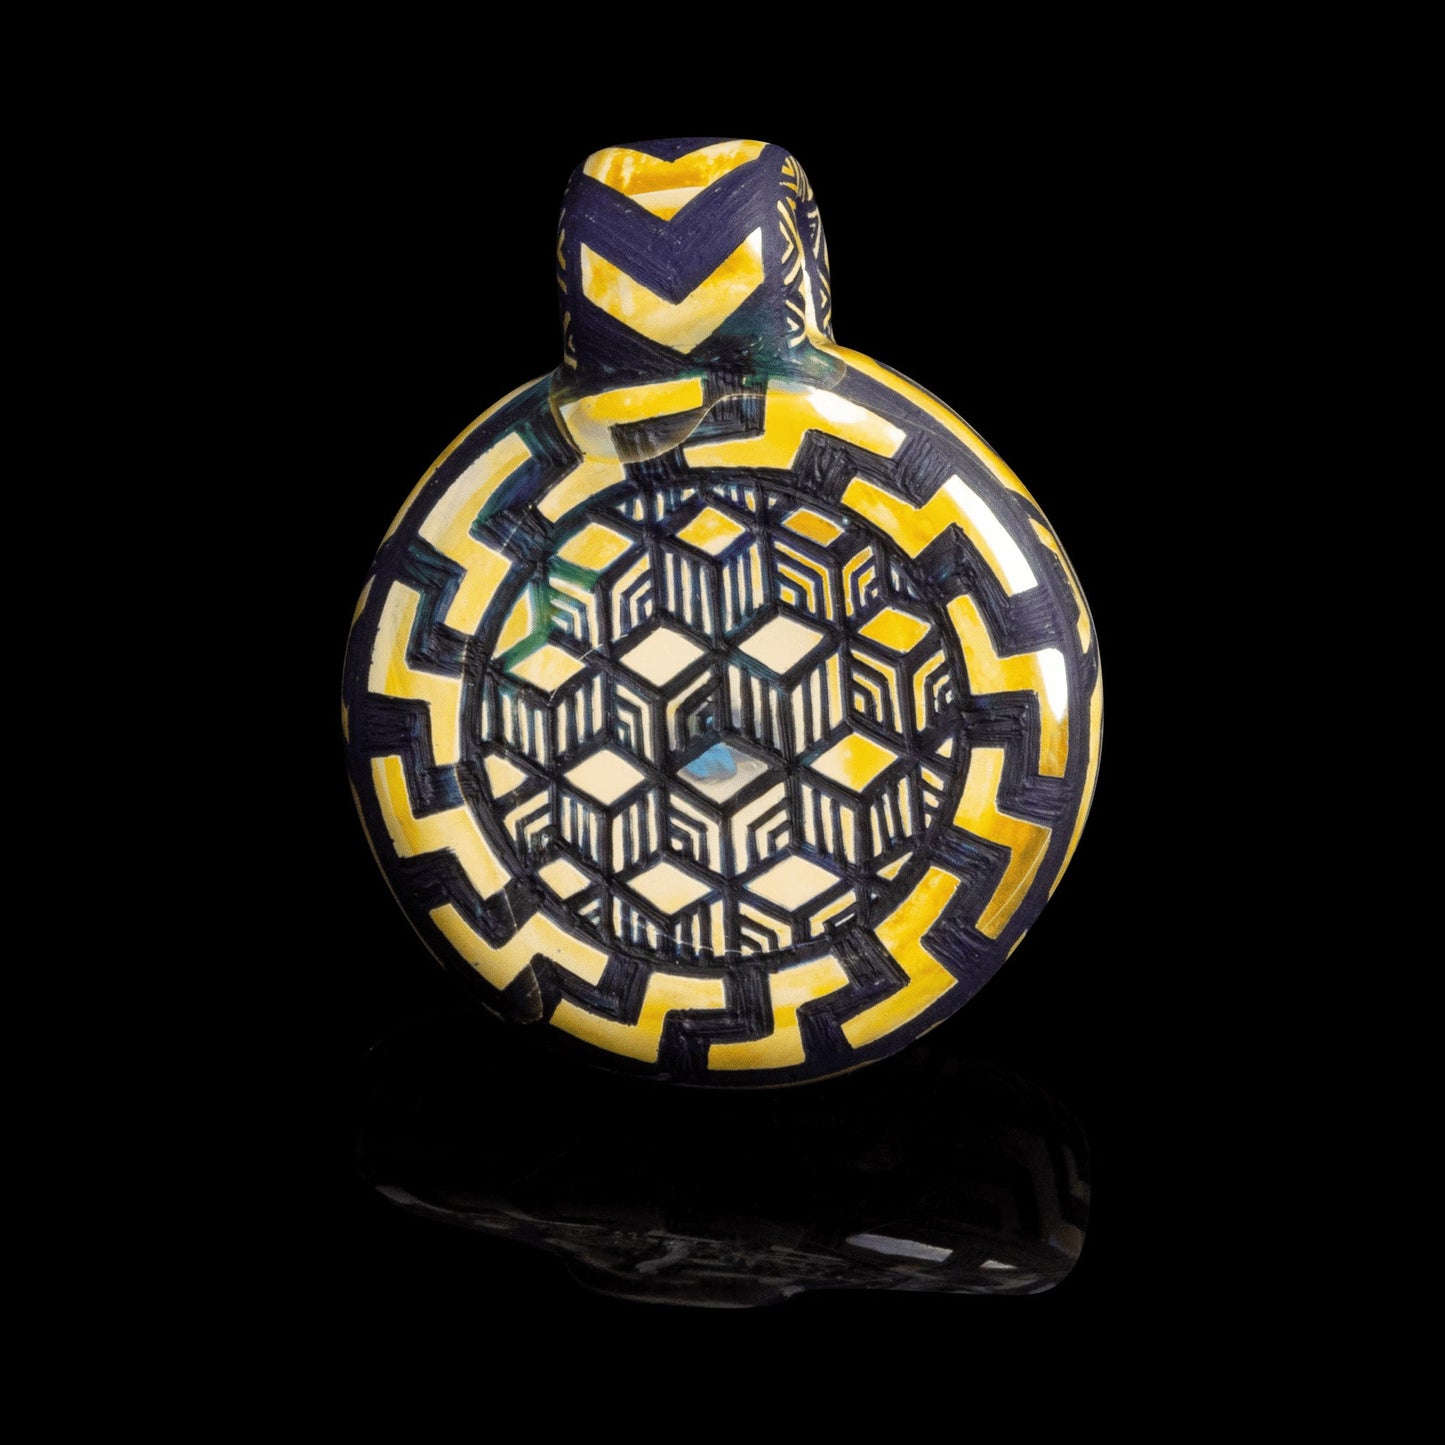 artisan-crafted glass pendant - Collab Pendant by John W x Artist Stylie (GV 2022)